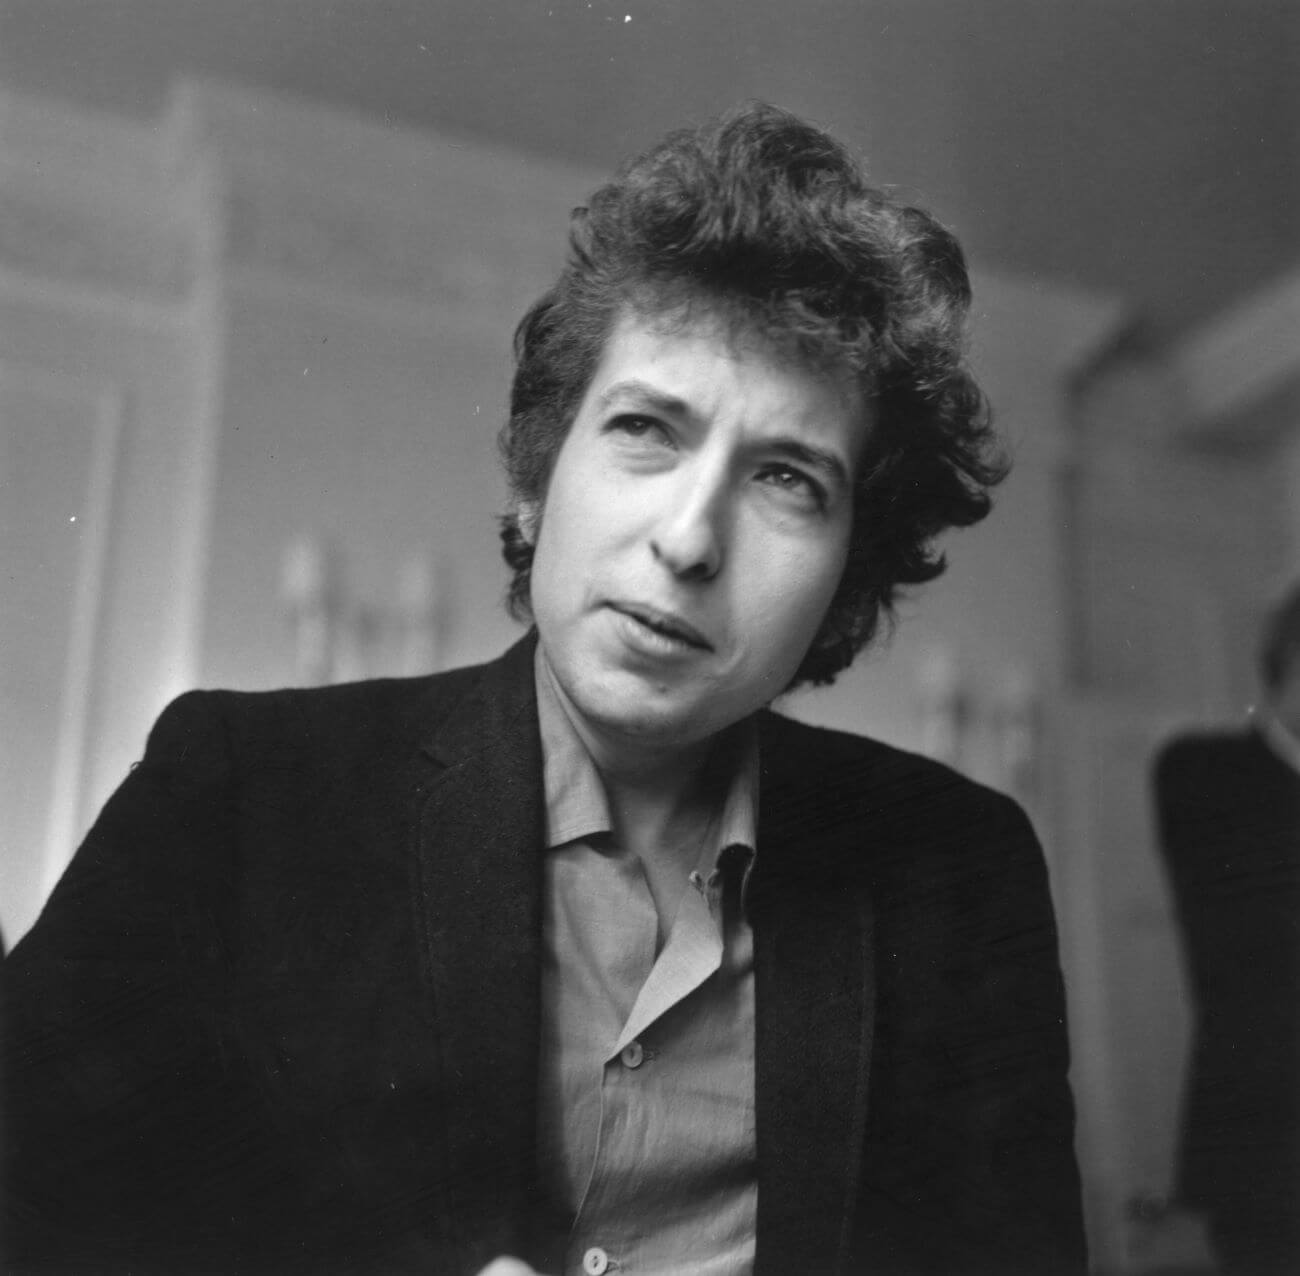 A black and white picture of Bob Dylan, one of the biggest musicians of the 1960s, wearing a suit jacket.